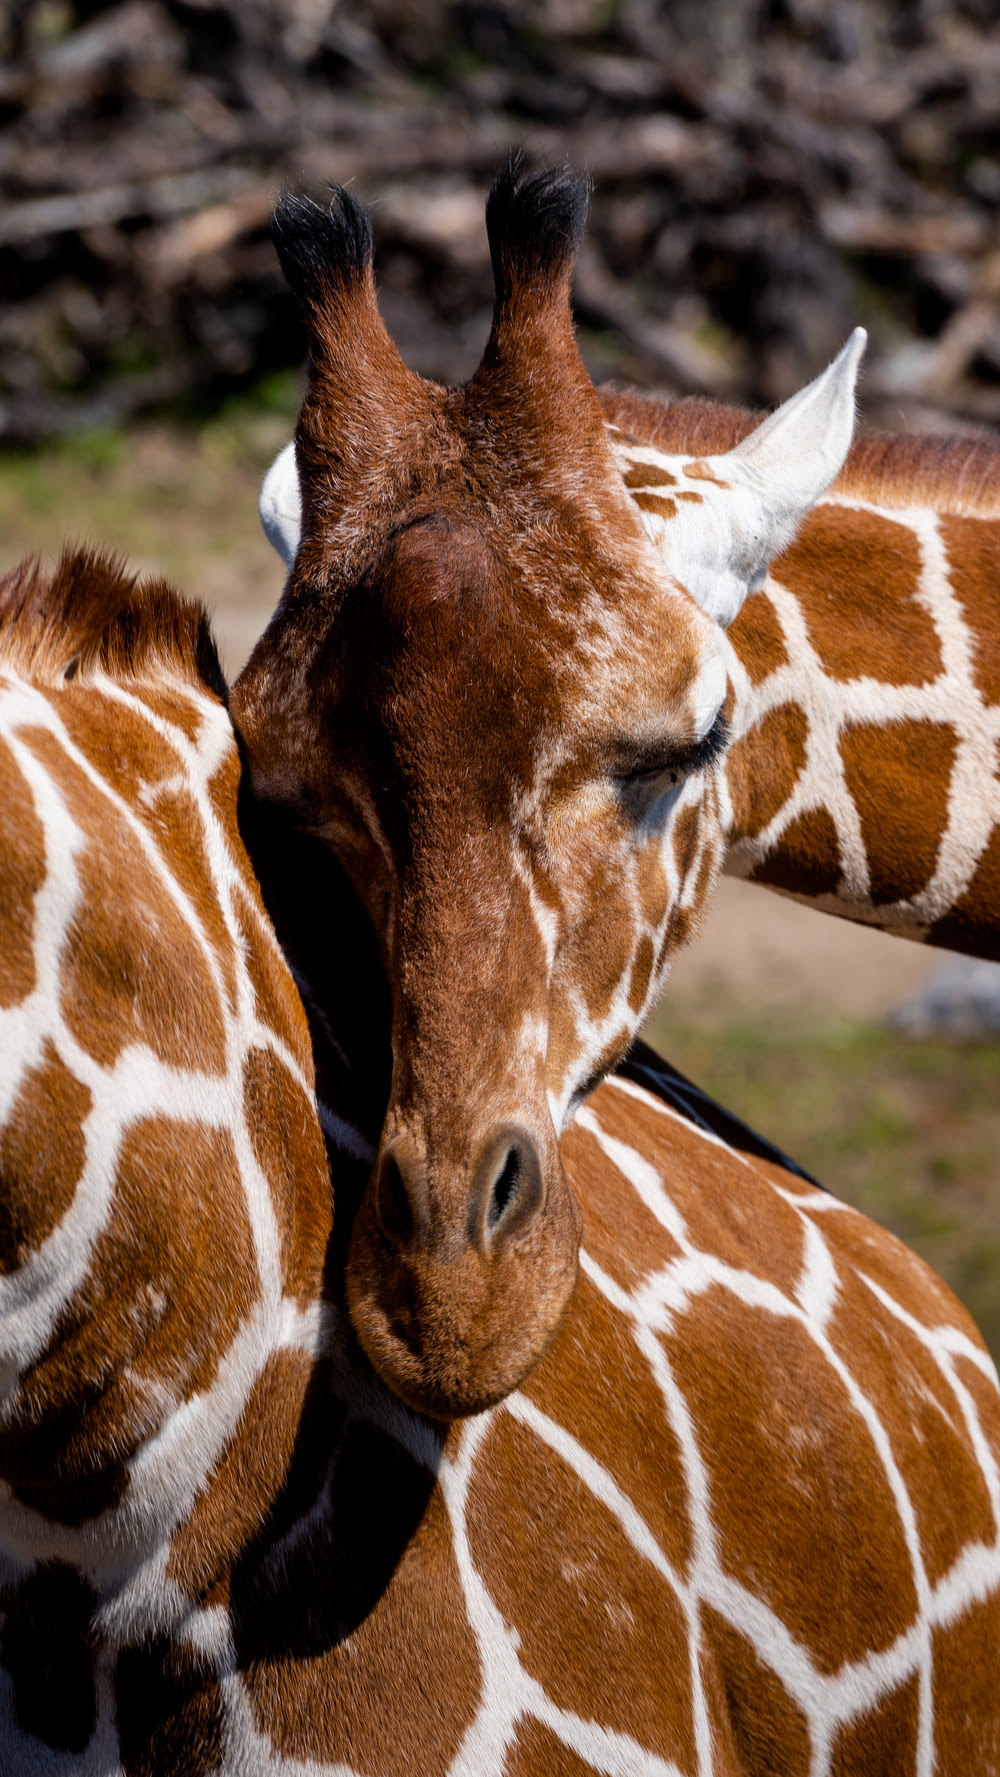 a close up of two giraffes near one another